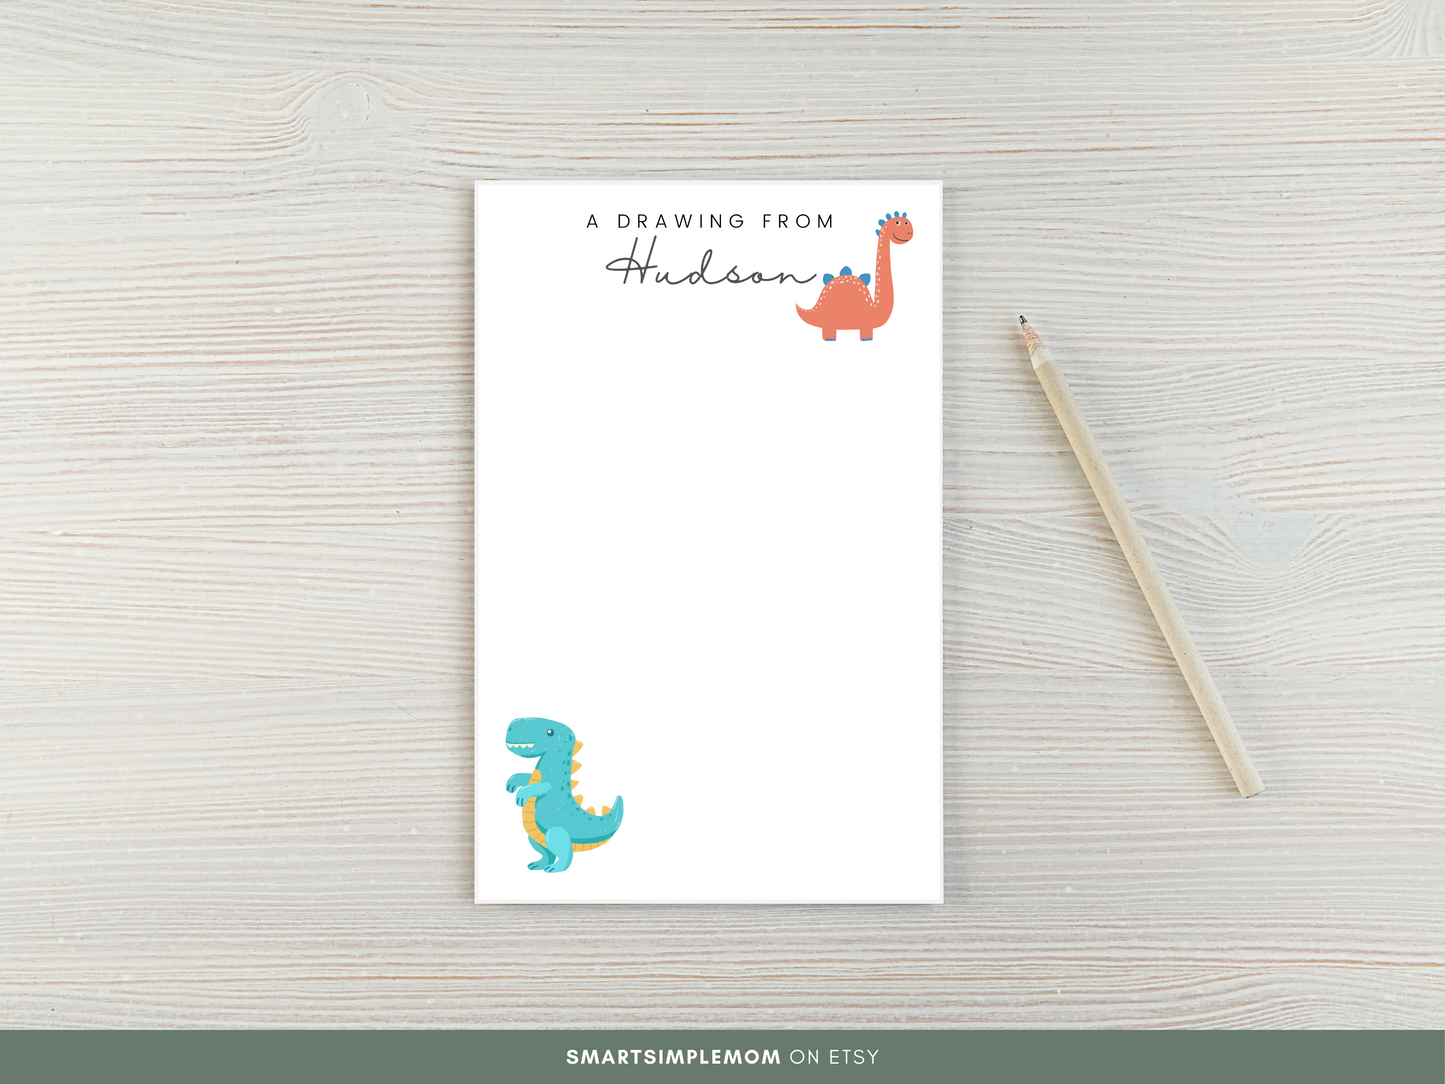 NOTEPAD FOR KIDS Personalized